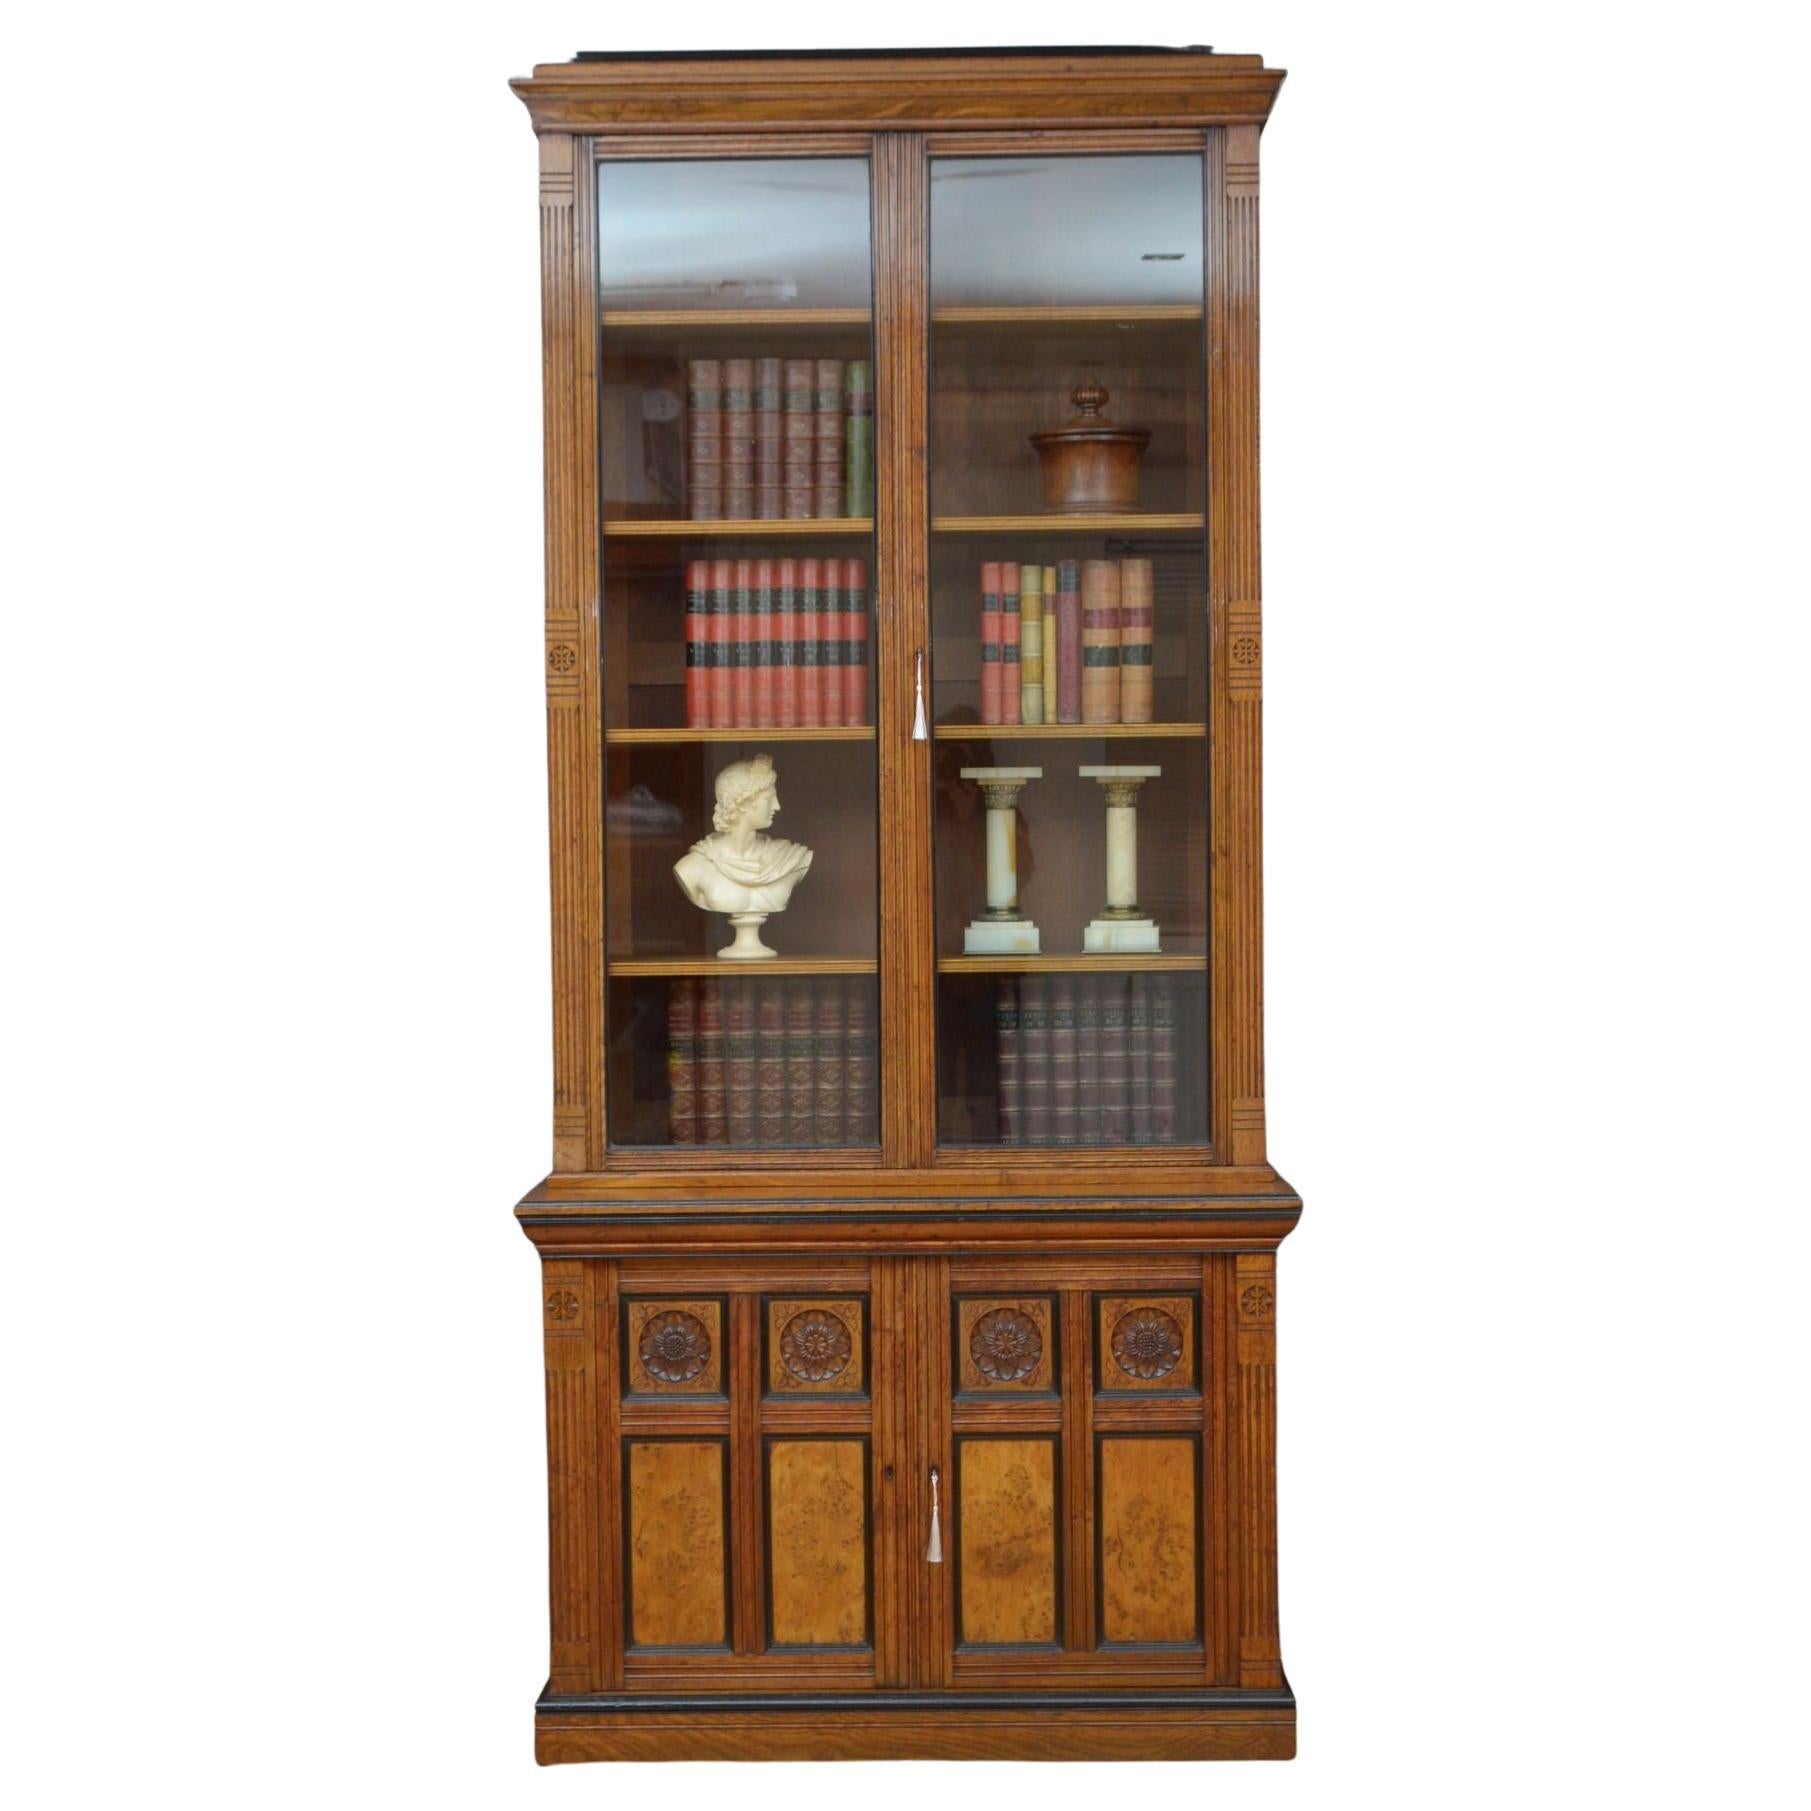 Lamb of Manchester Aesthetic Movement Bookcase in Oak